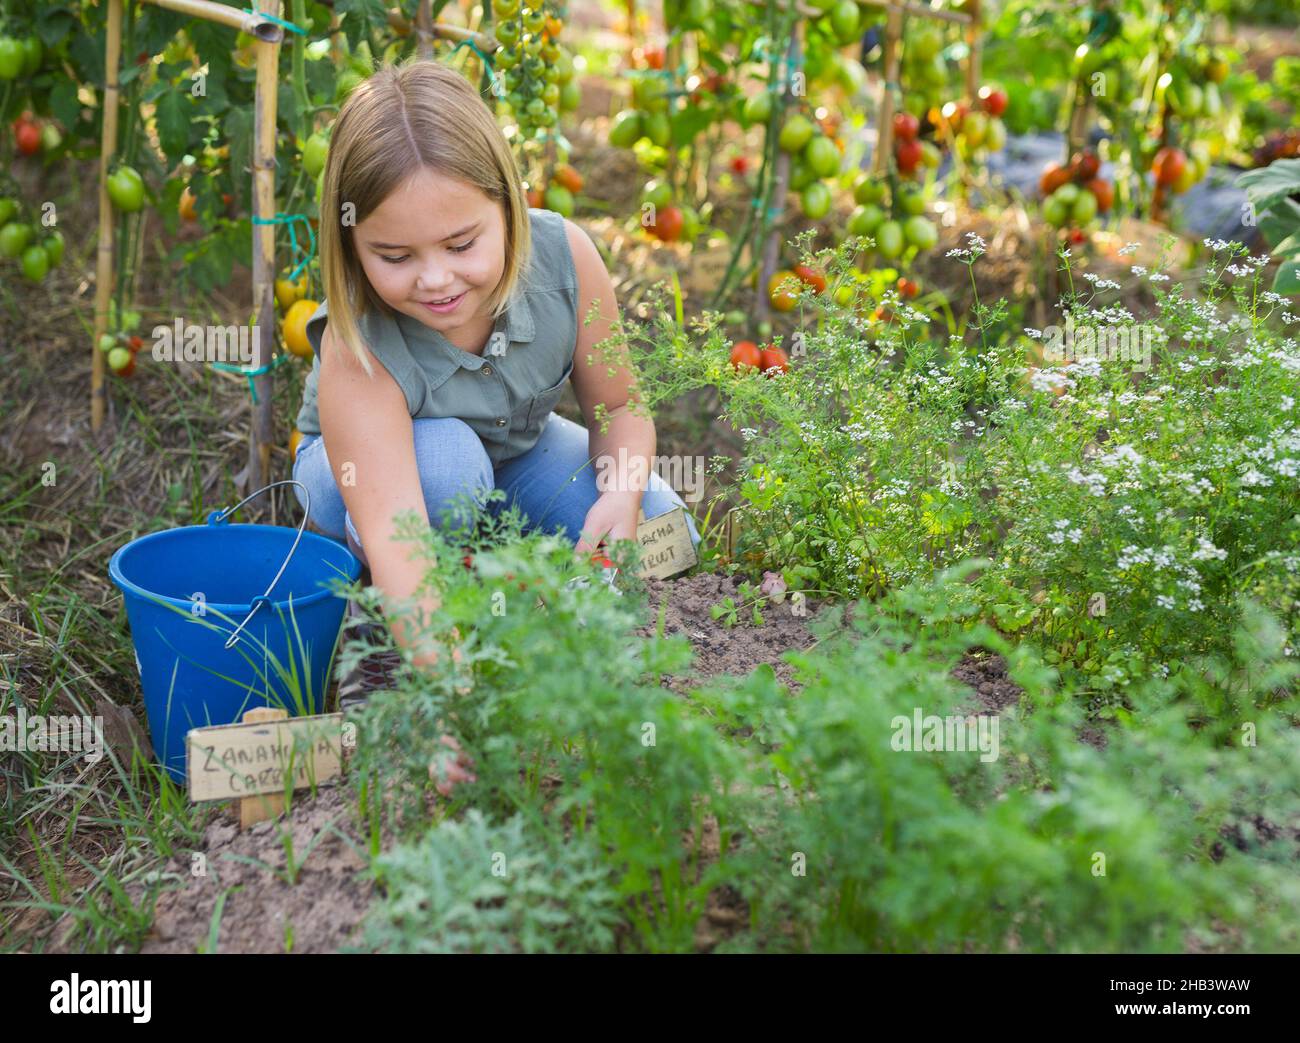 Smiling little girl at the farm Stock Photo - Alamy